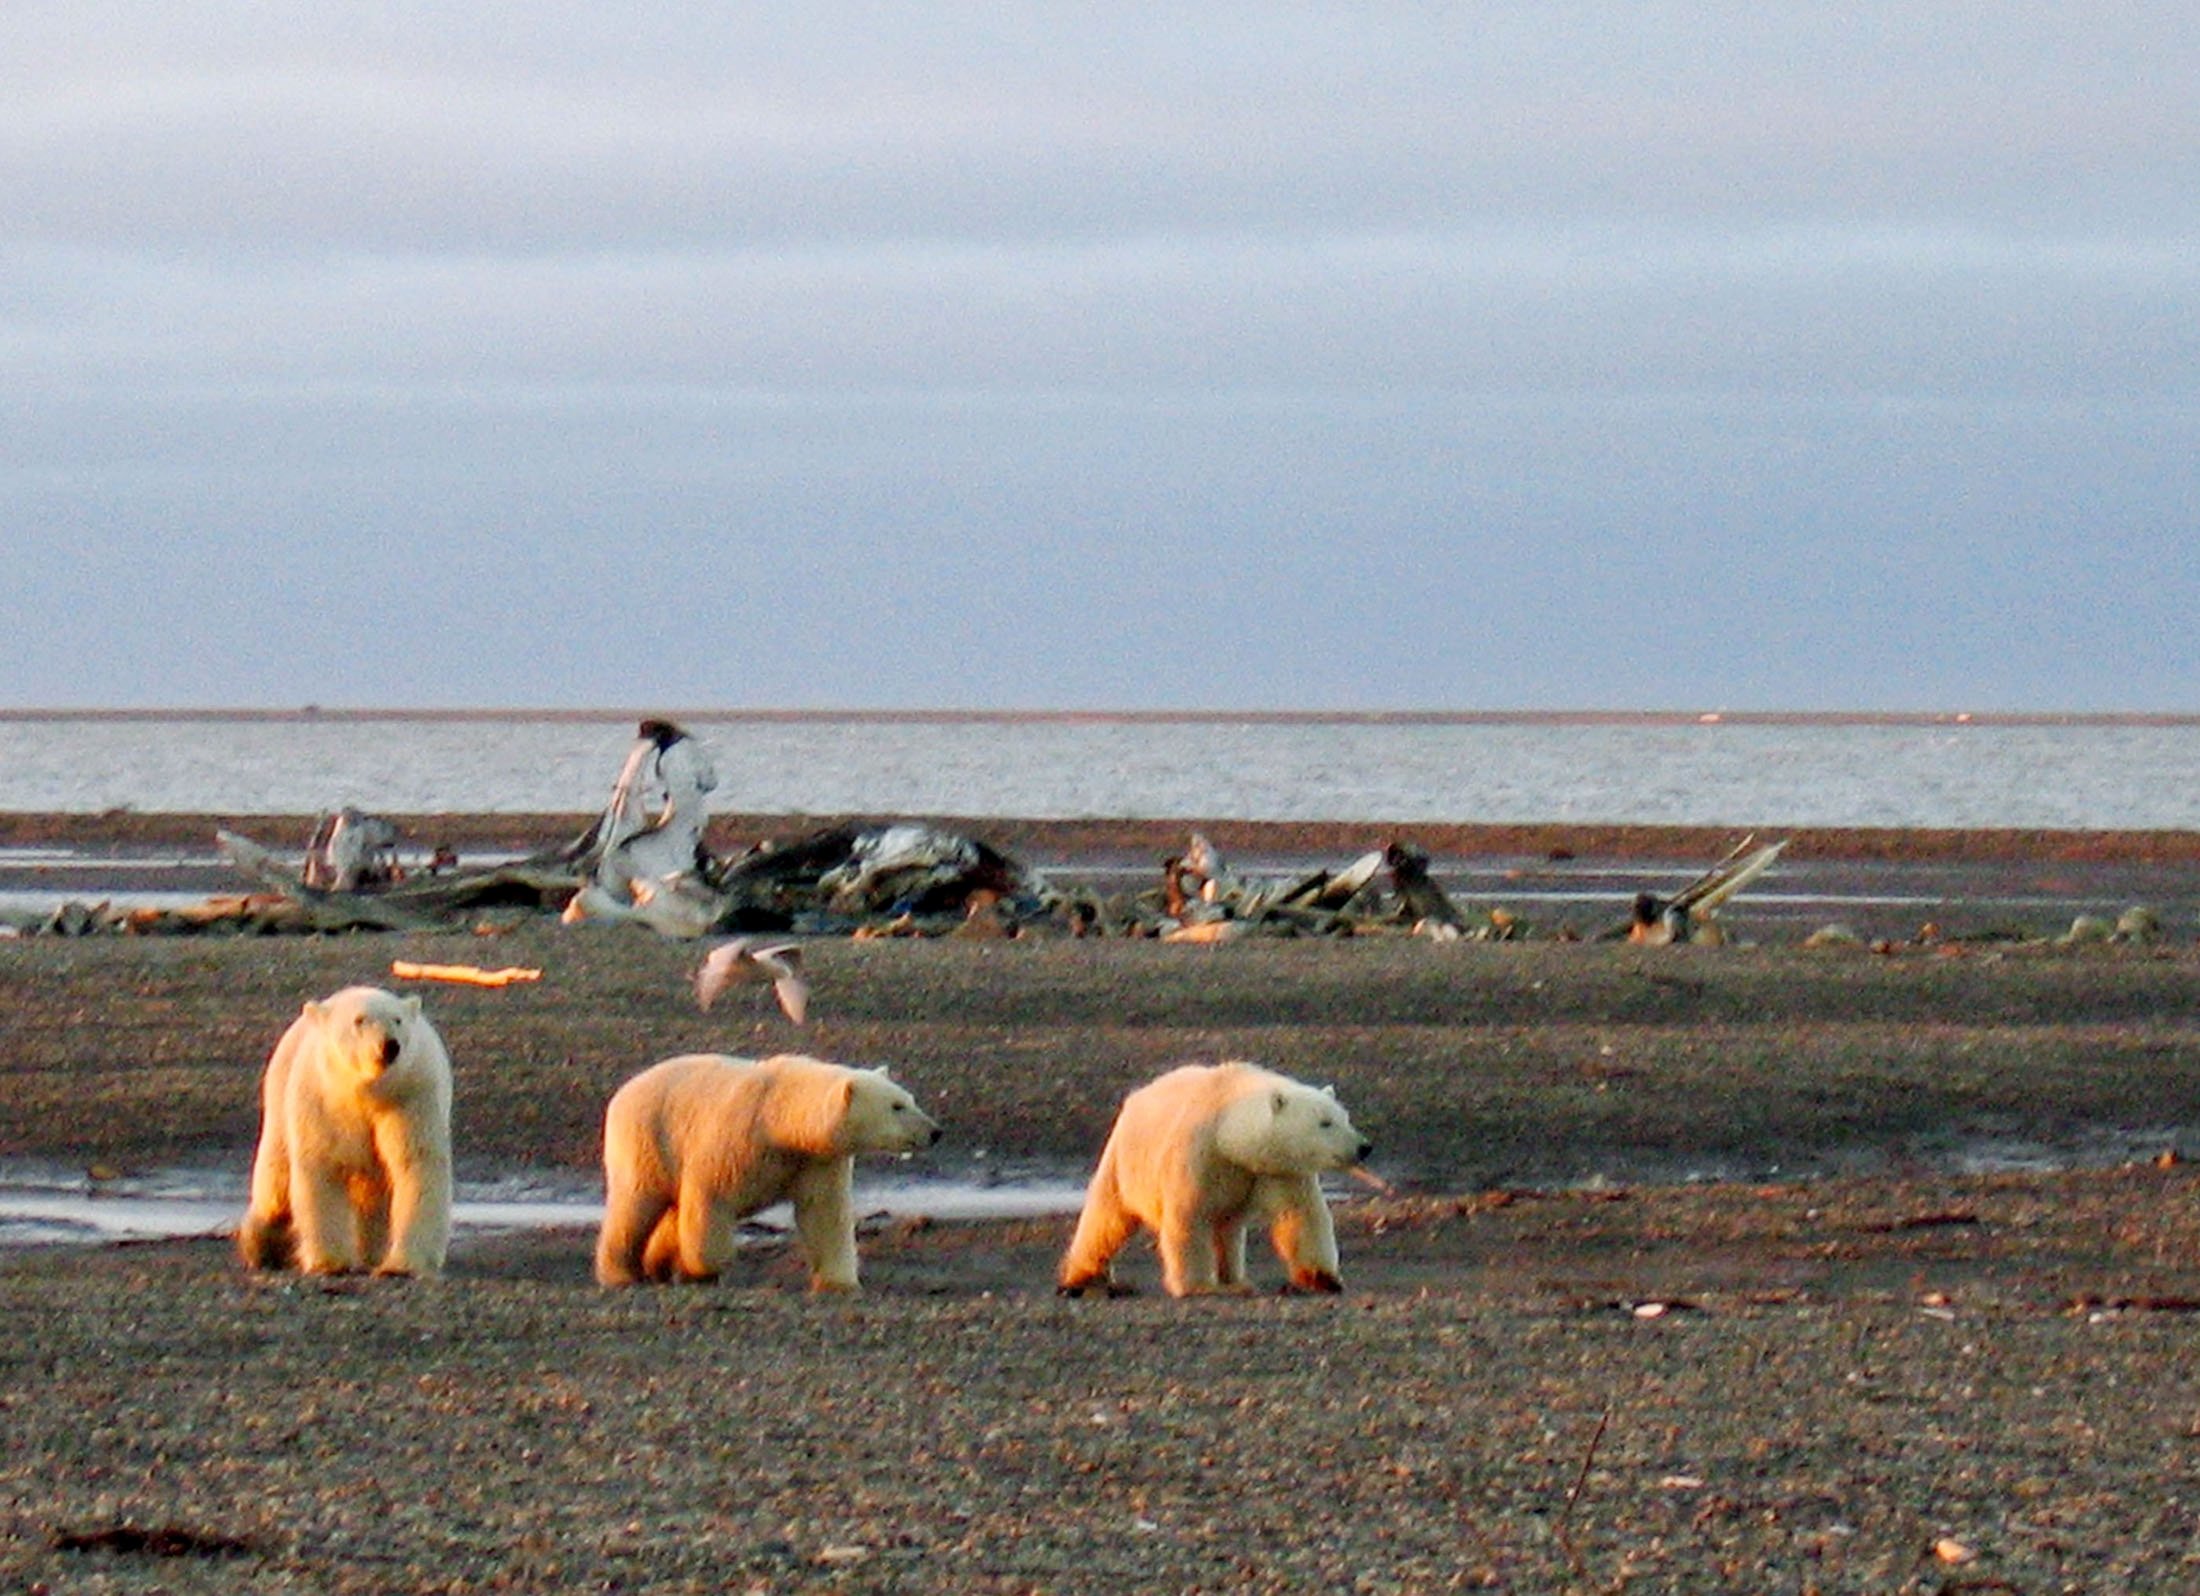 Three polar bears are seen on the Beaufort Sea coast within the 1002 Area of the Arctic National Wildlife Refuge in this undated handout photo, Dec. 21, 2005. (U.S. Fish and Wildlife Service Alaska Image Library/Handout via REUTERS)